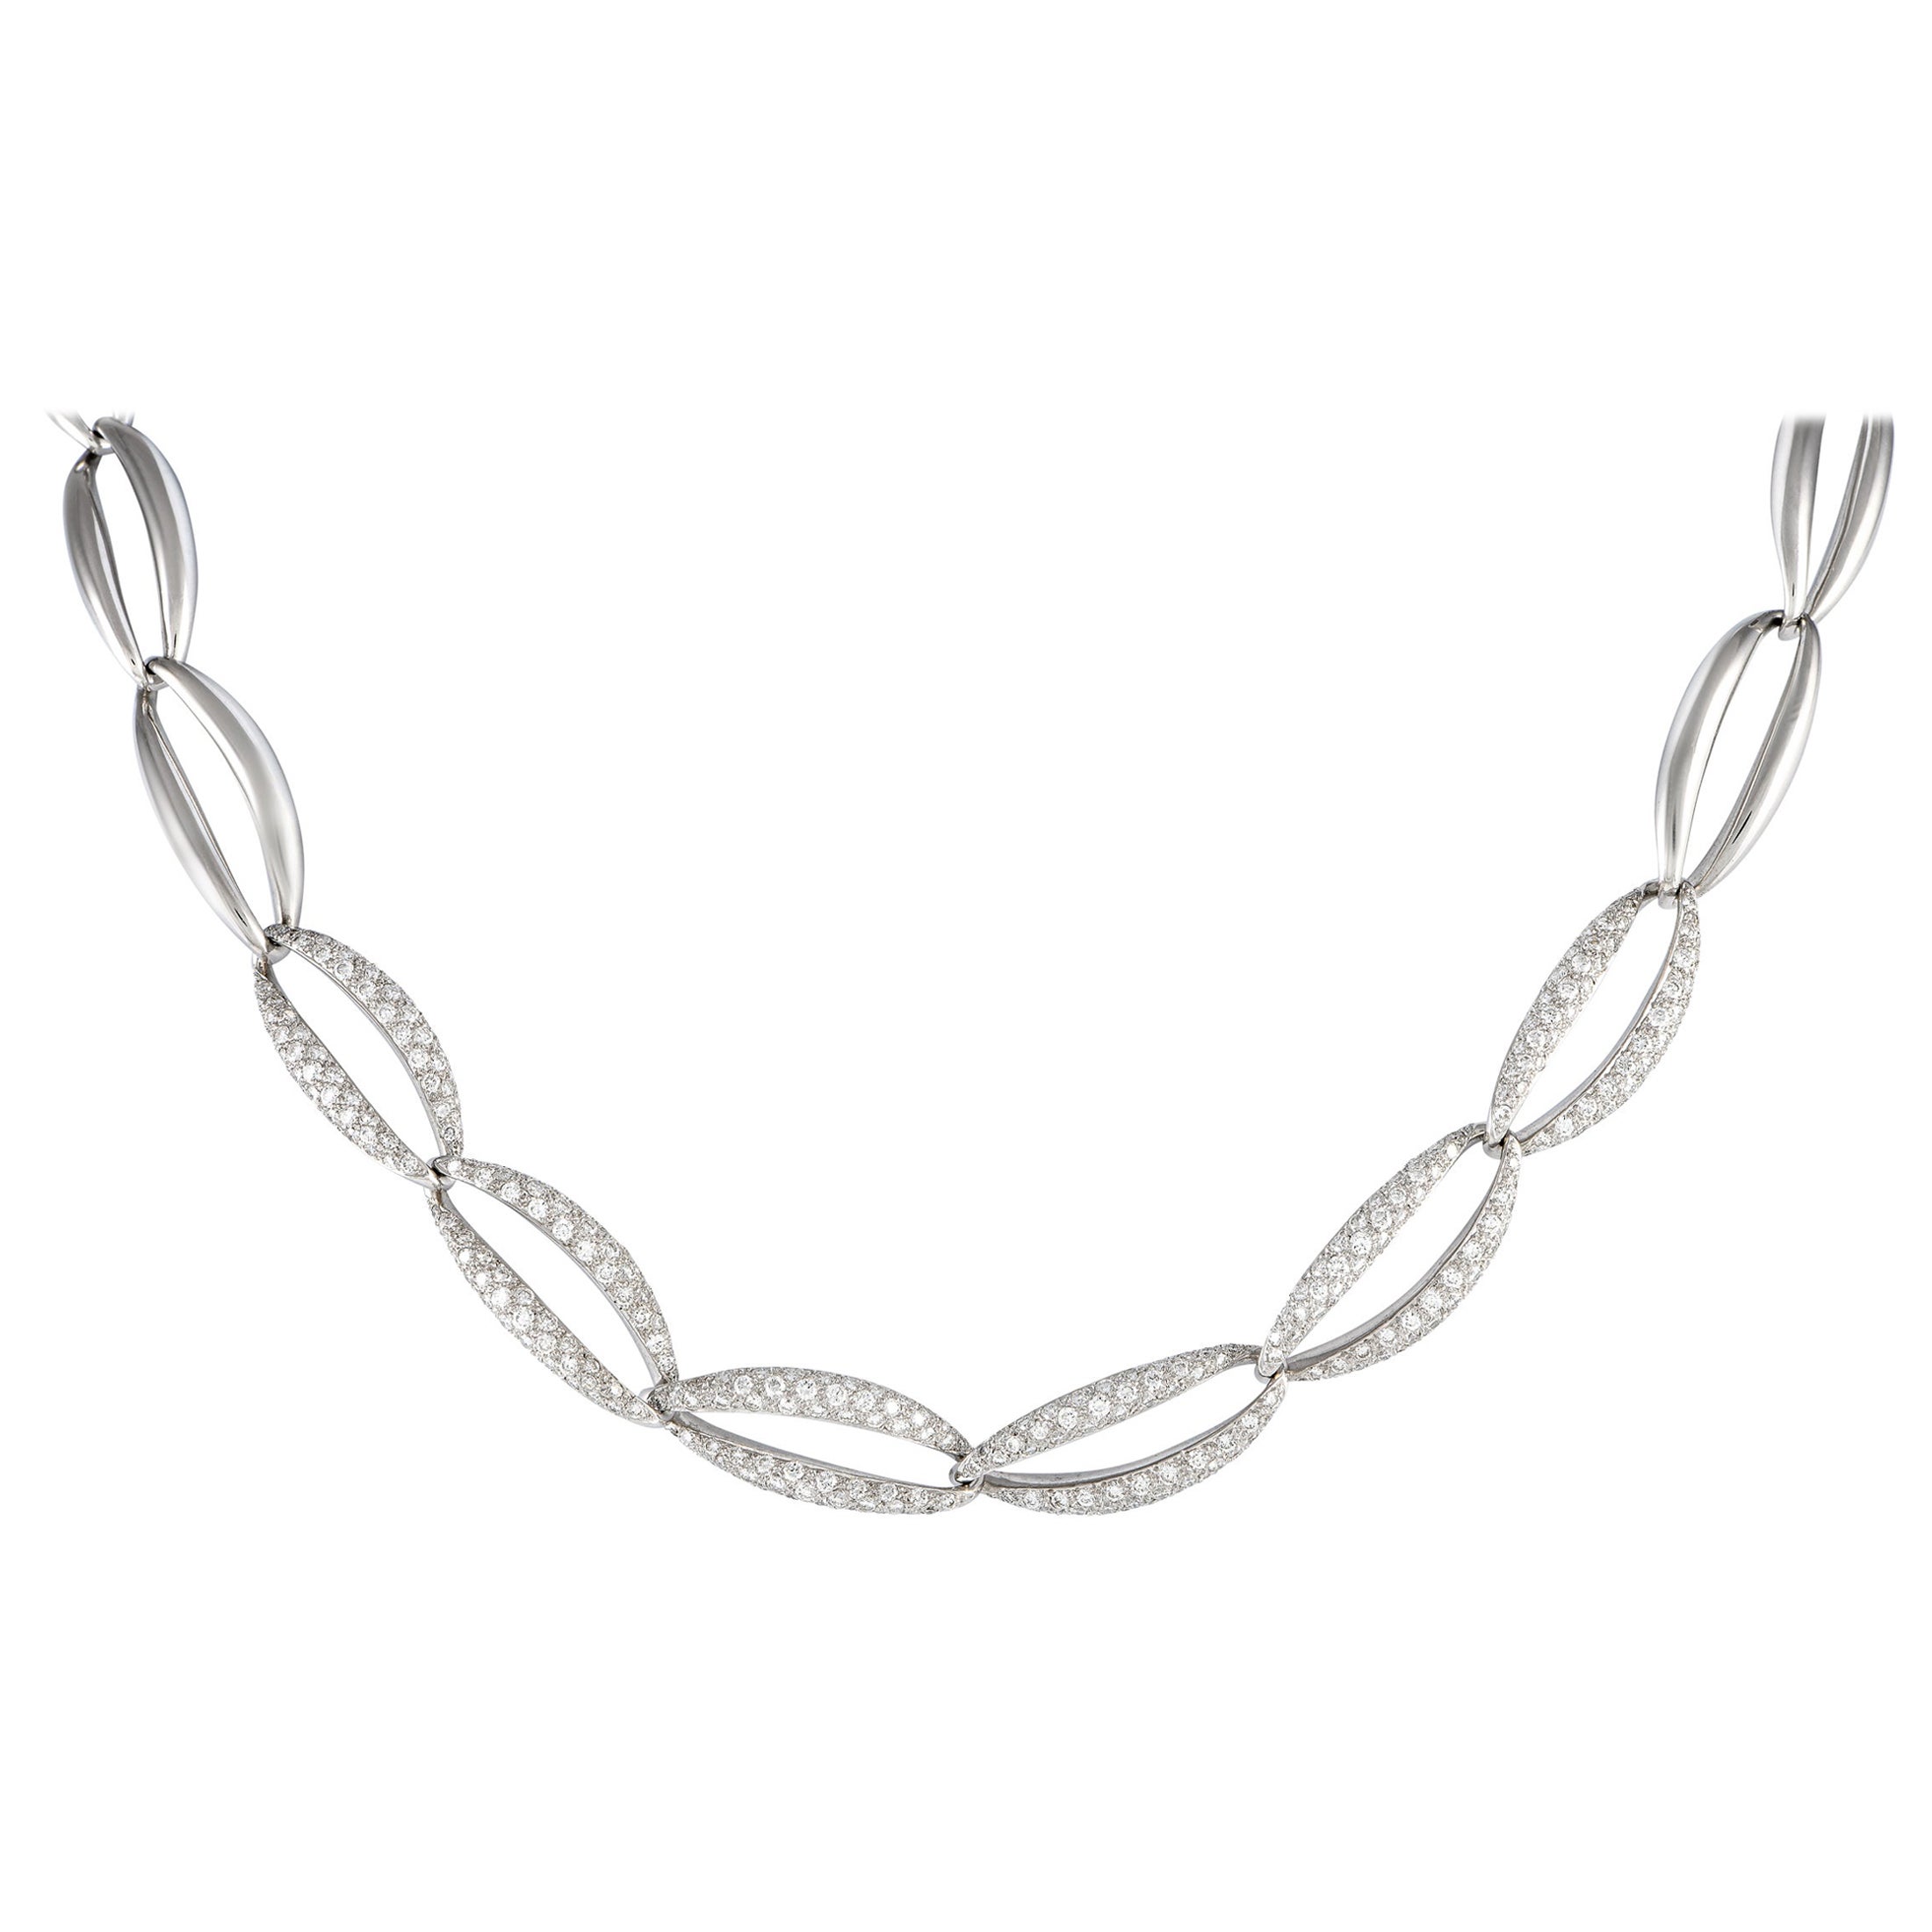 LB Exclusive 18K White Gold 4.06ct Diamond Oval Chain Link Necklace MF04-100523 For Sale